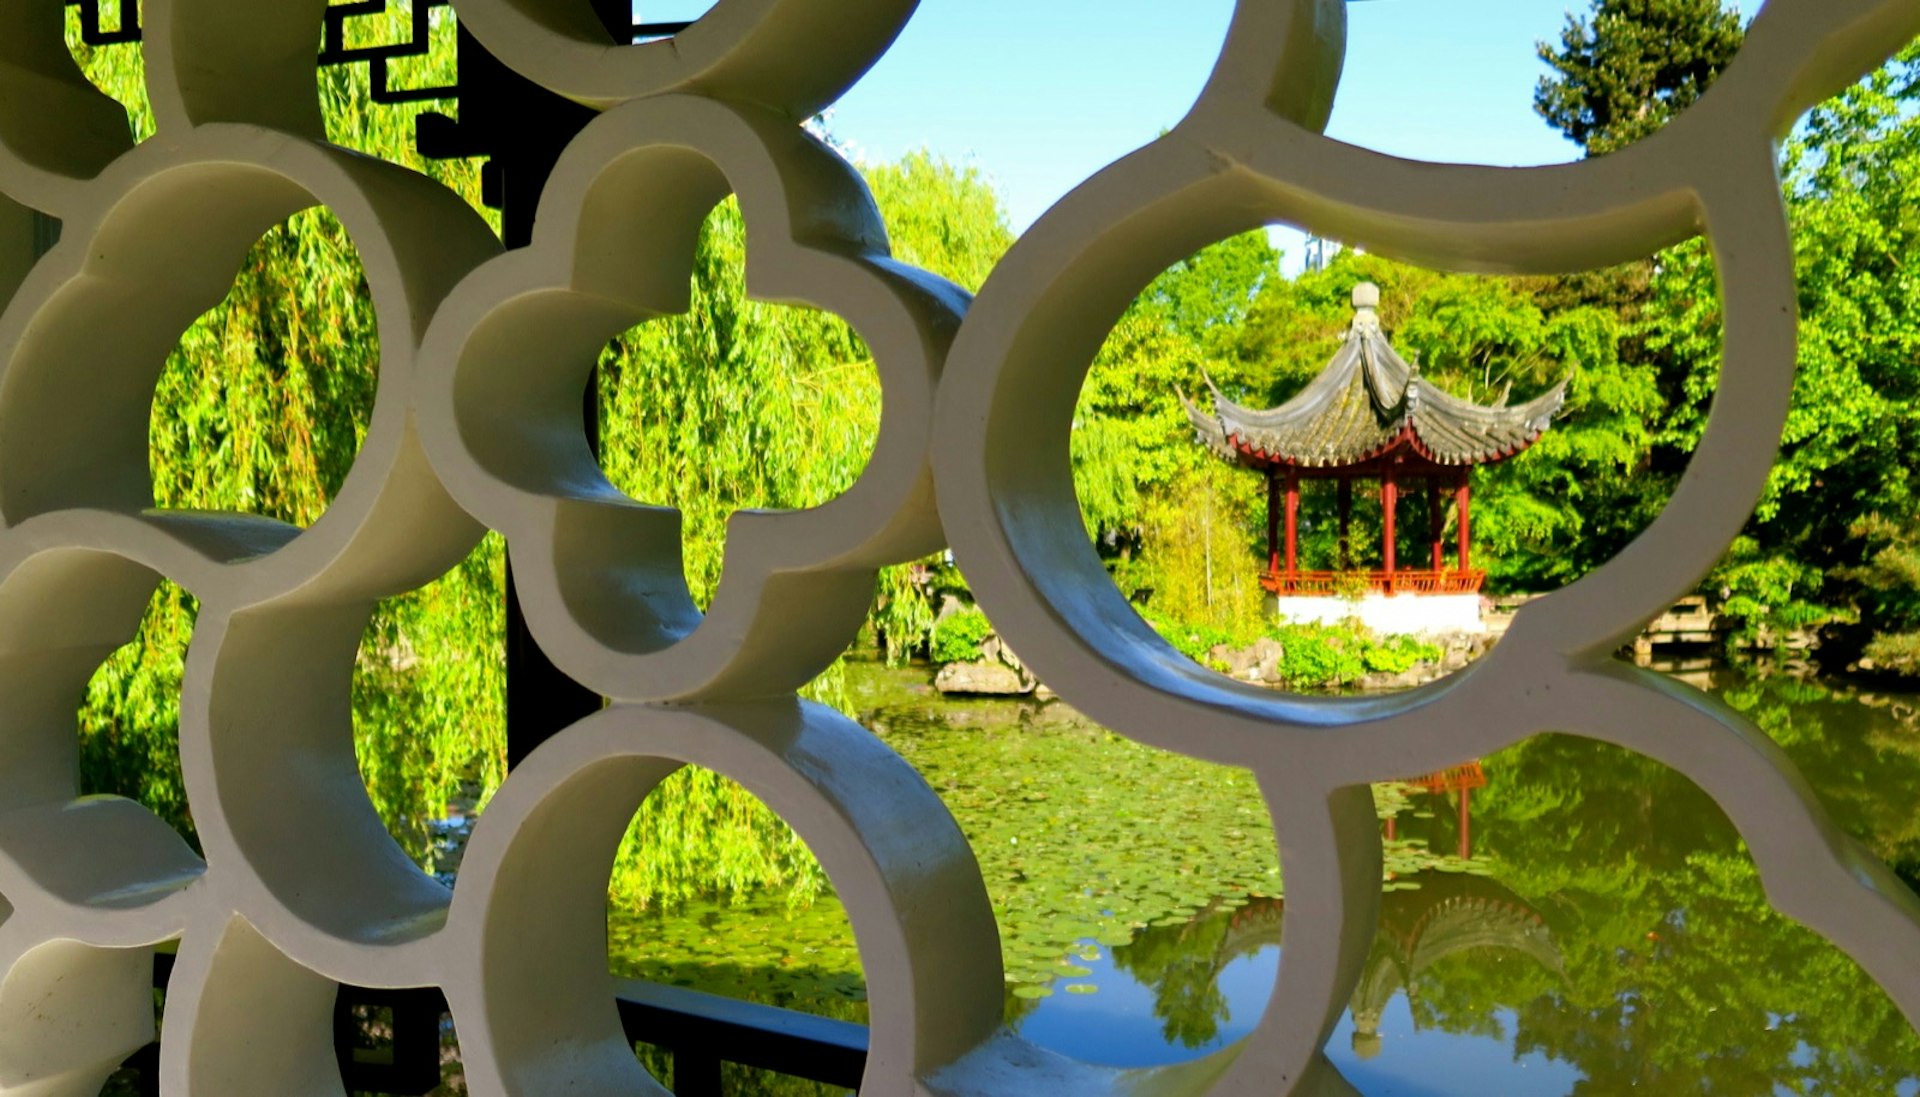 A red pagoda on a pond is seen through the ornate stone scrollwork on a bridge bannister